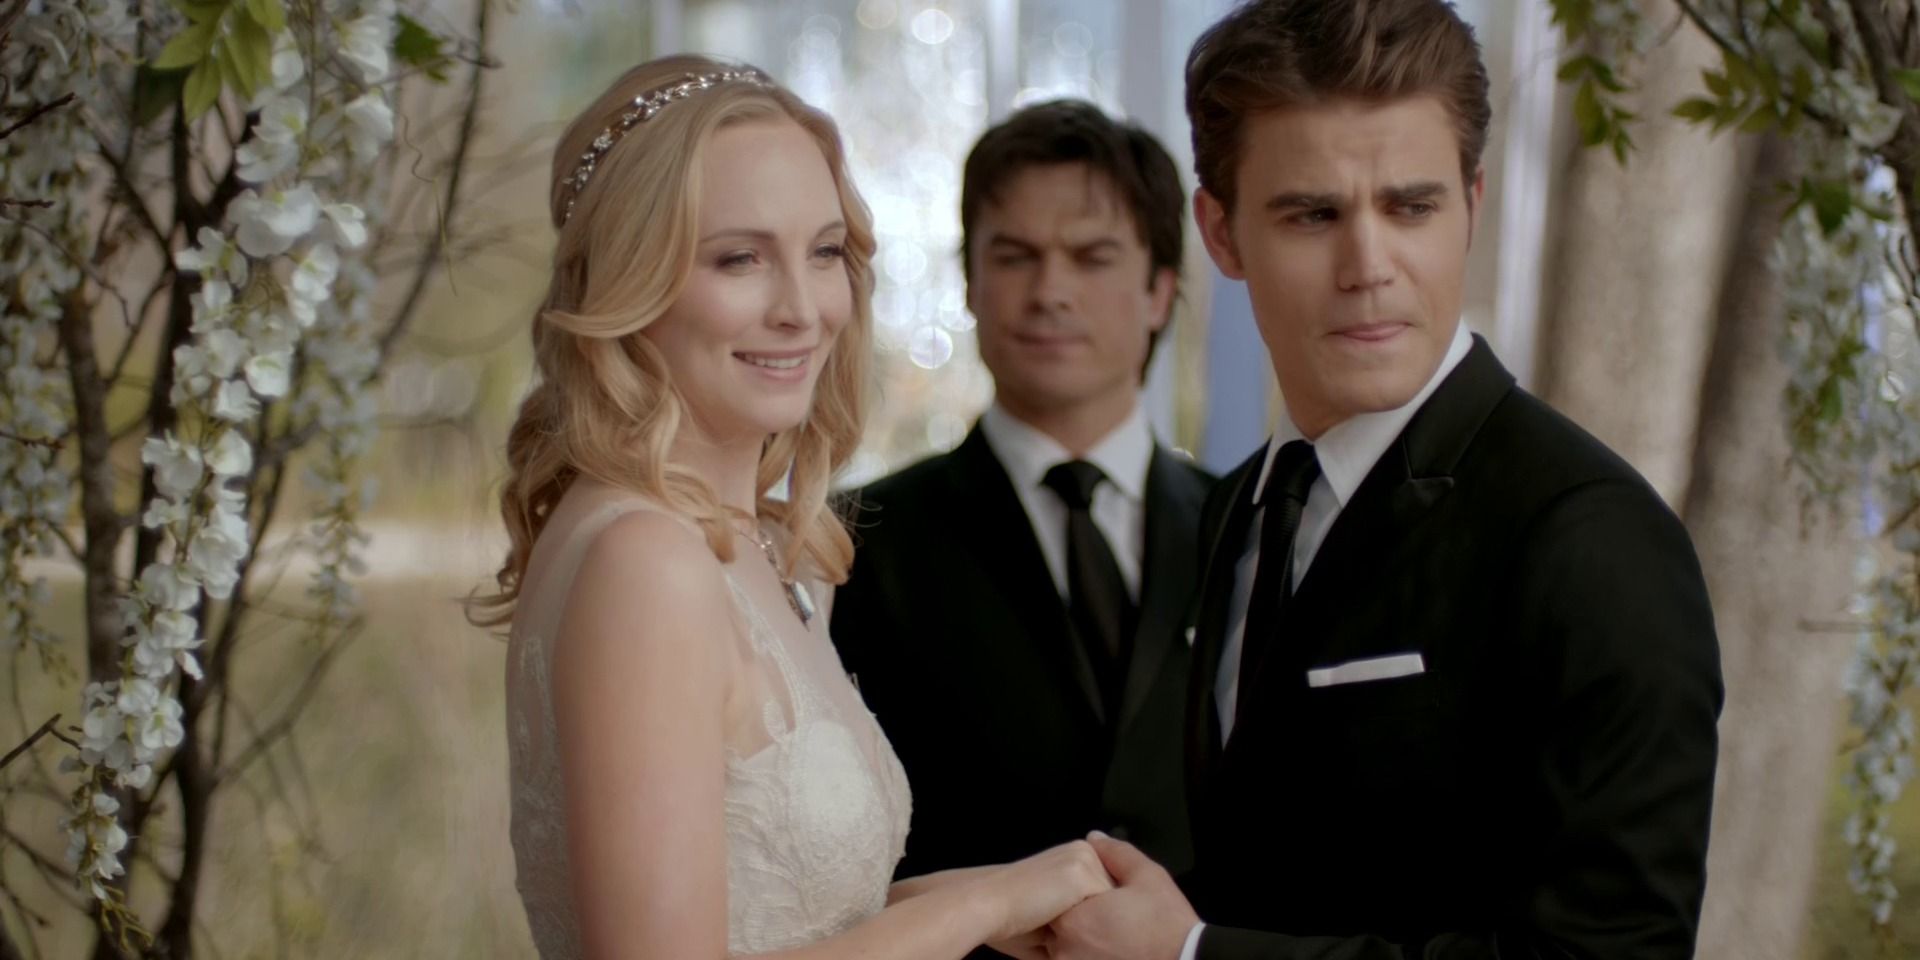 Caroline and Stefan while Damon marries them in The Vampire Diaries